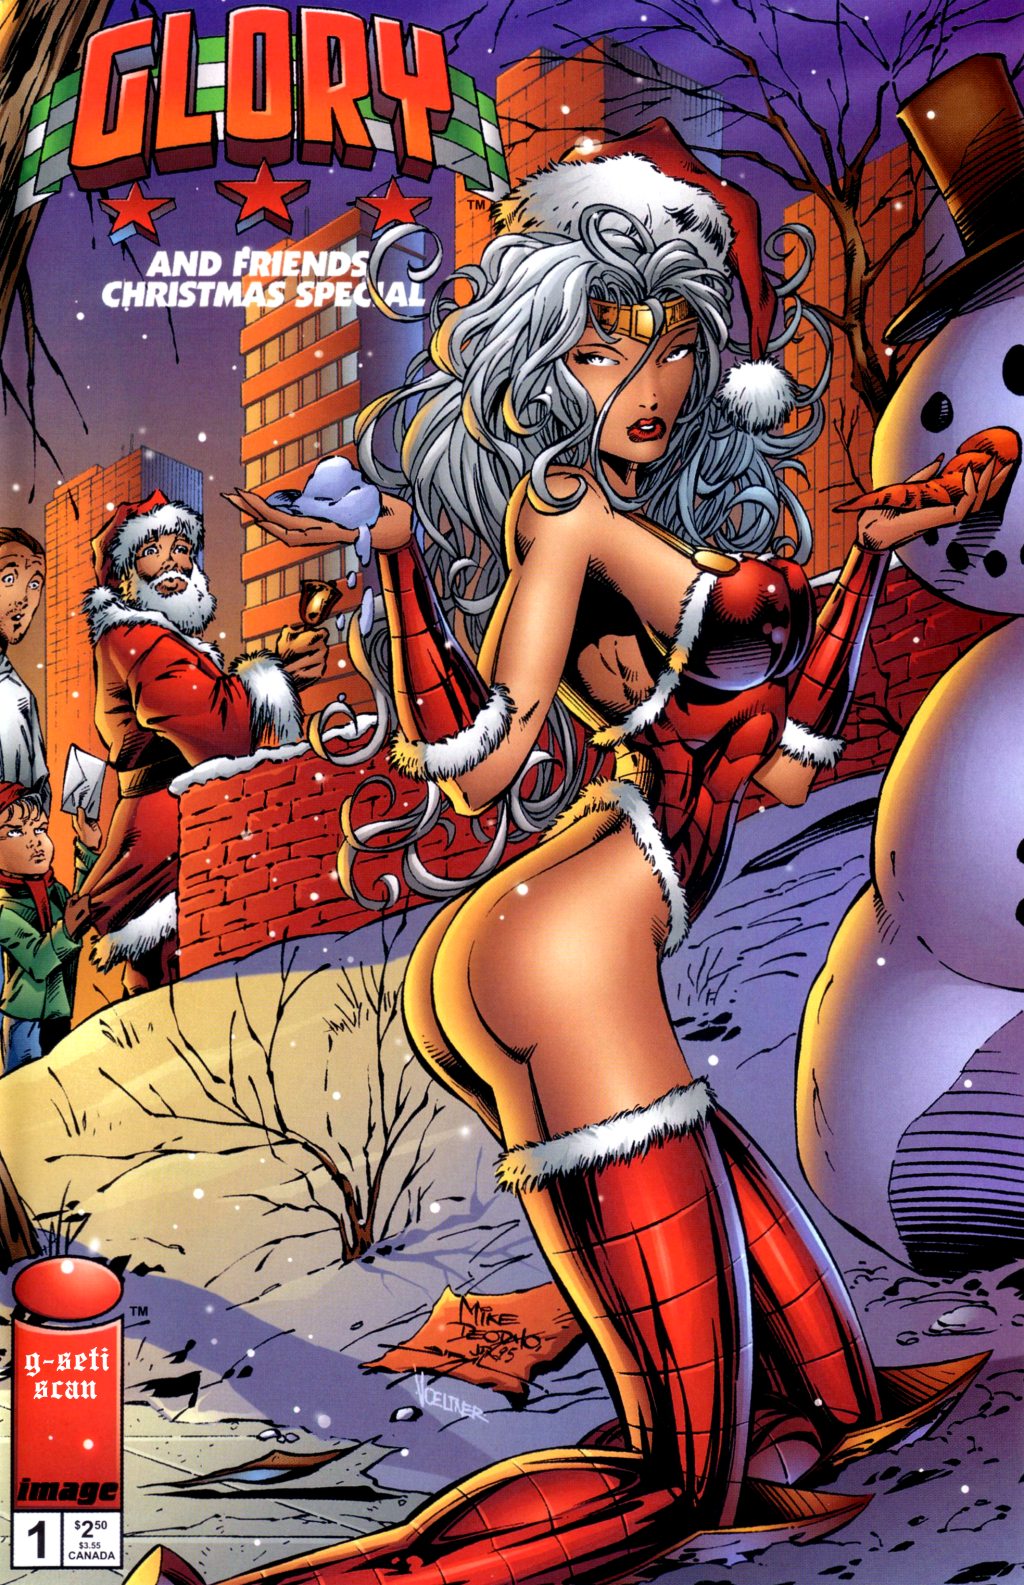 Read online Glory & Friends Christmas Special comic -  Issue # Full - 1